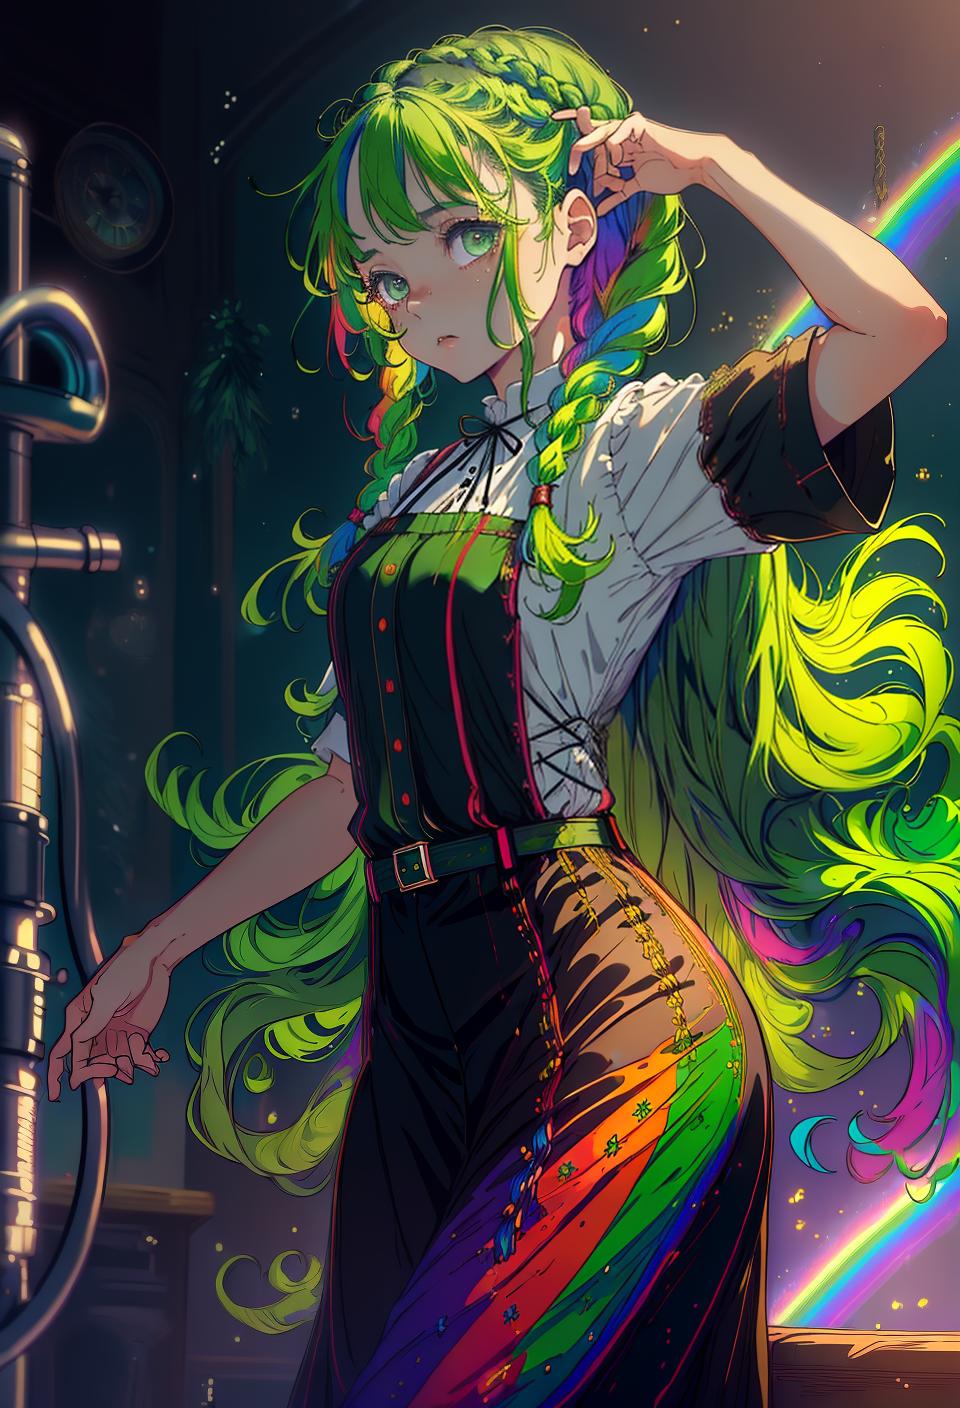  ((trending, highres, masterpiece, cinematic shot)), 1girl, young, female Amish outfit, psychedelic effects, medium-length curly green hair, hair in braids, large rainbow-colored eyes, lazy personality, sleepy expression, grey skin, magical, limber